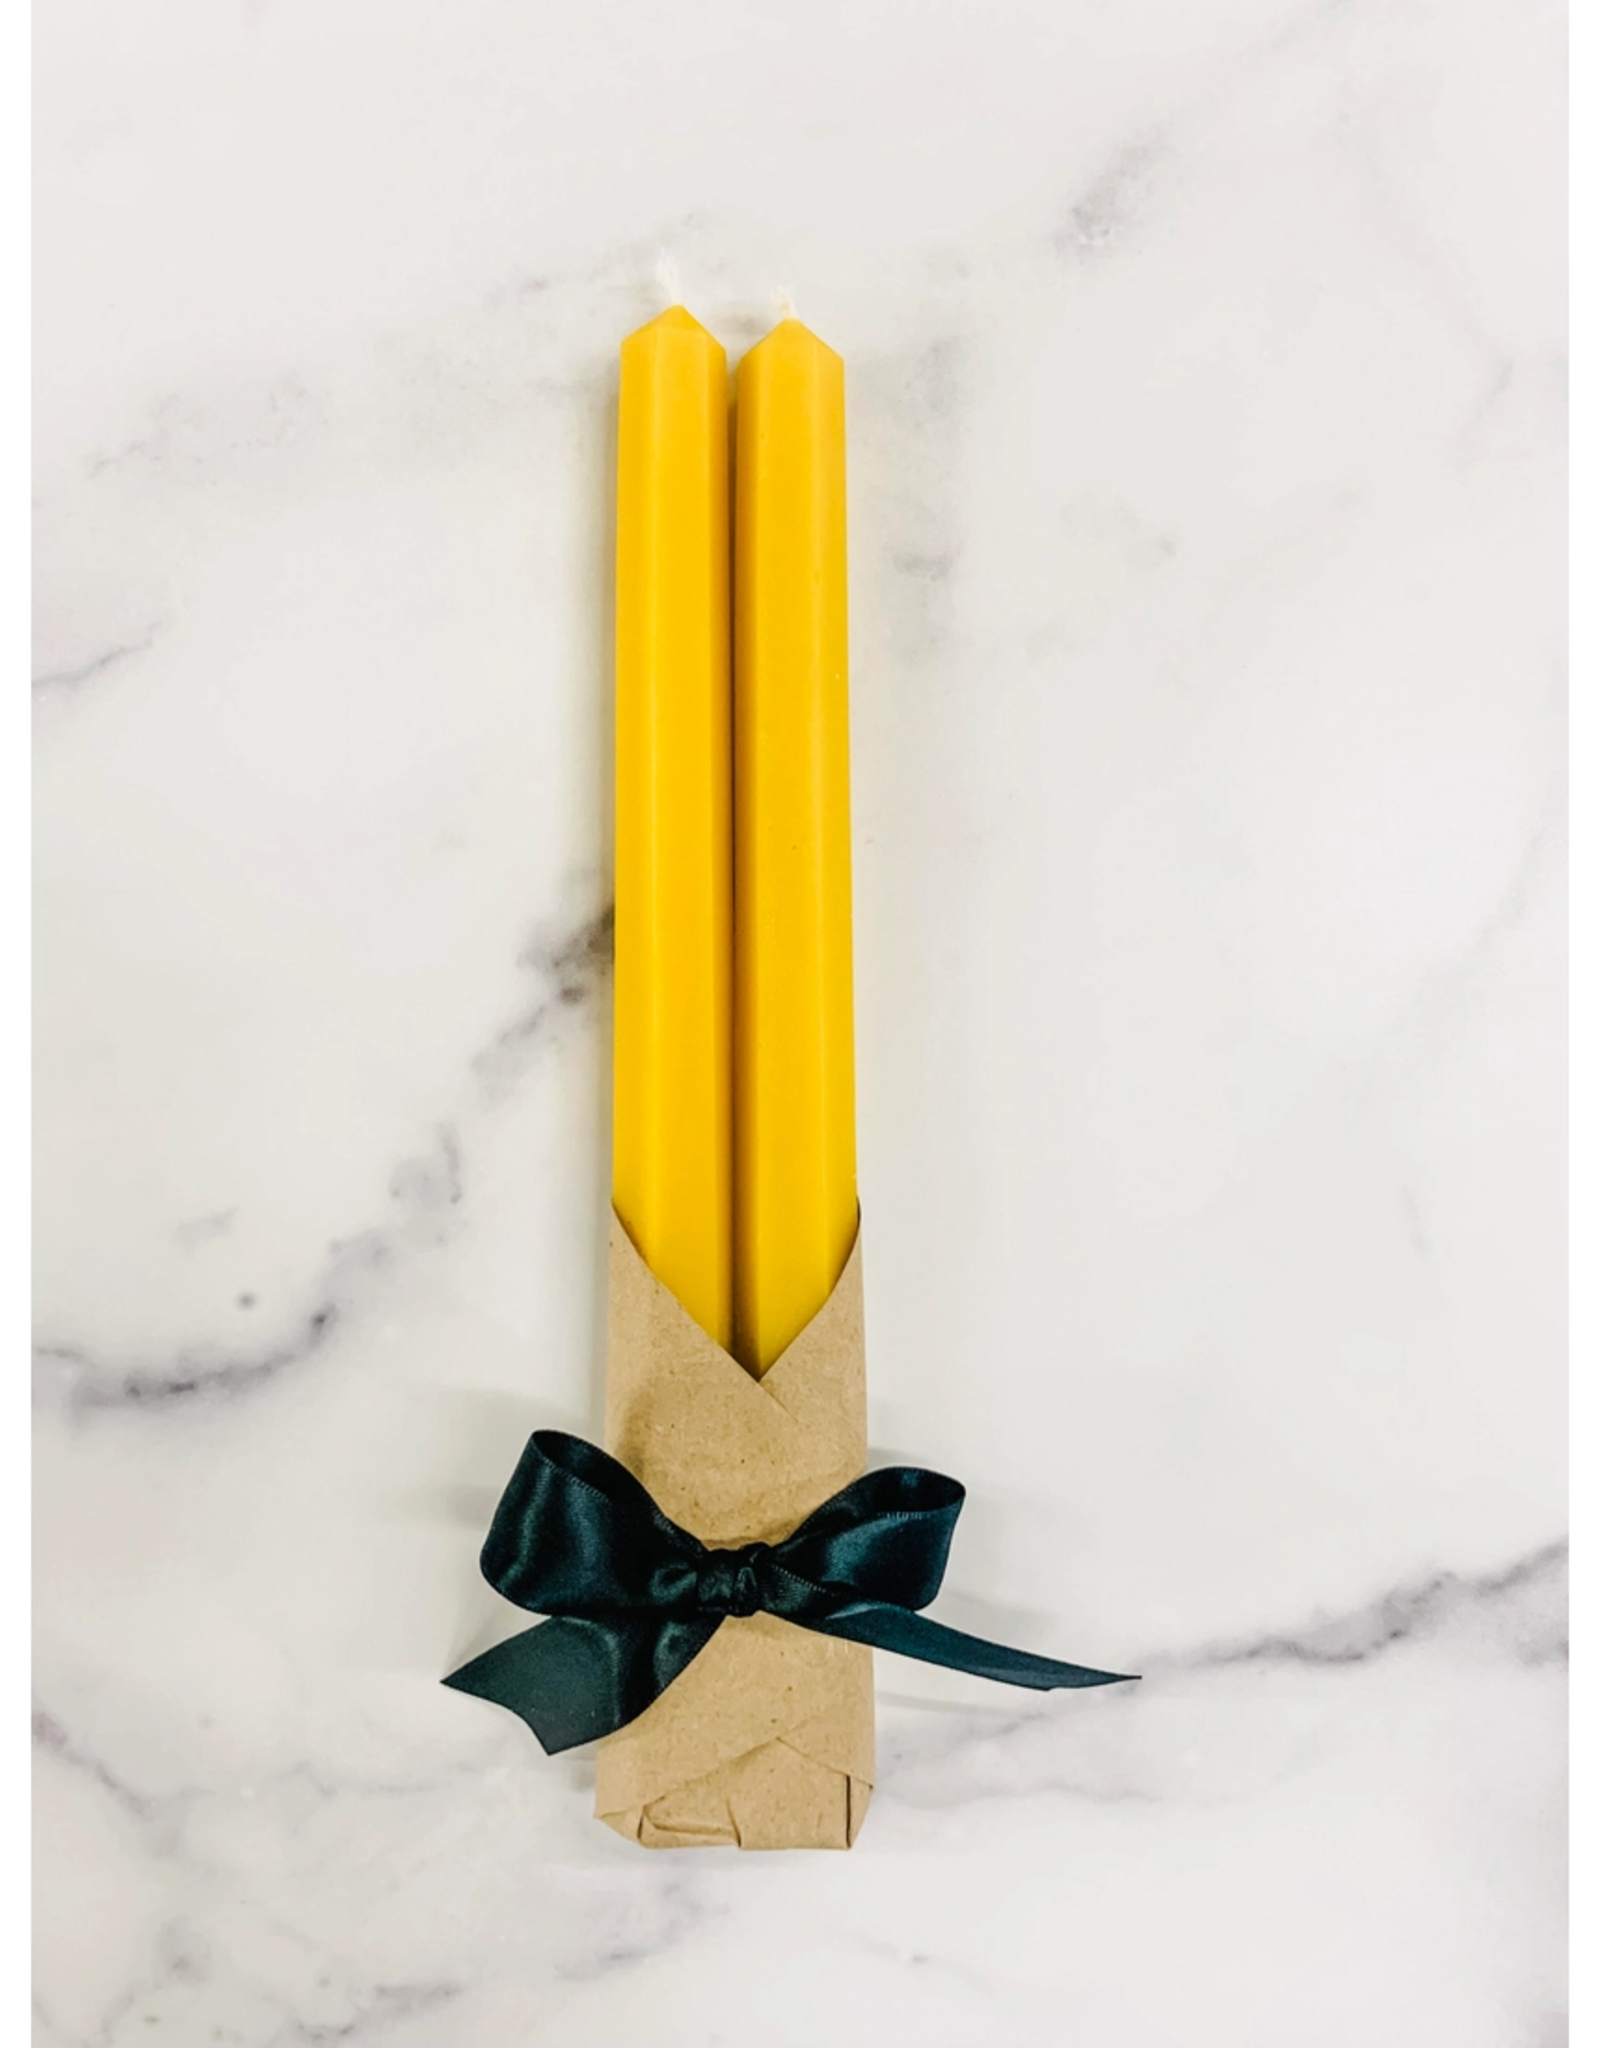 The Beekeepers Daughter Hexagon Beeswax Taper Candles